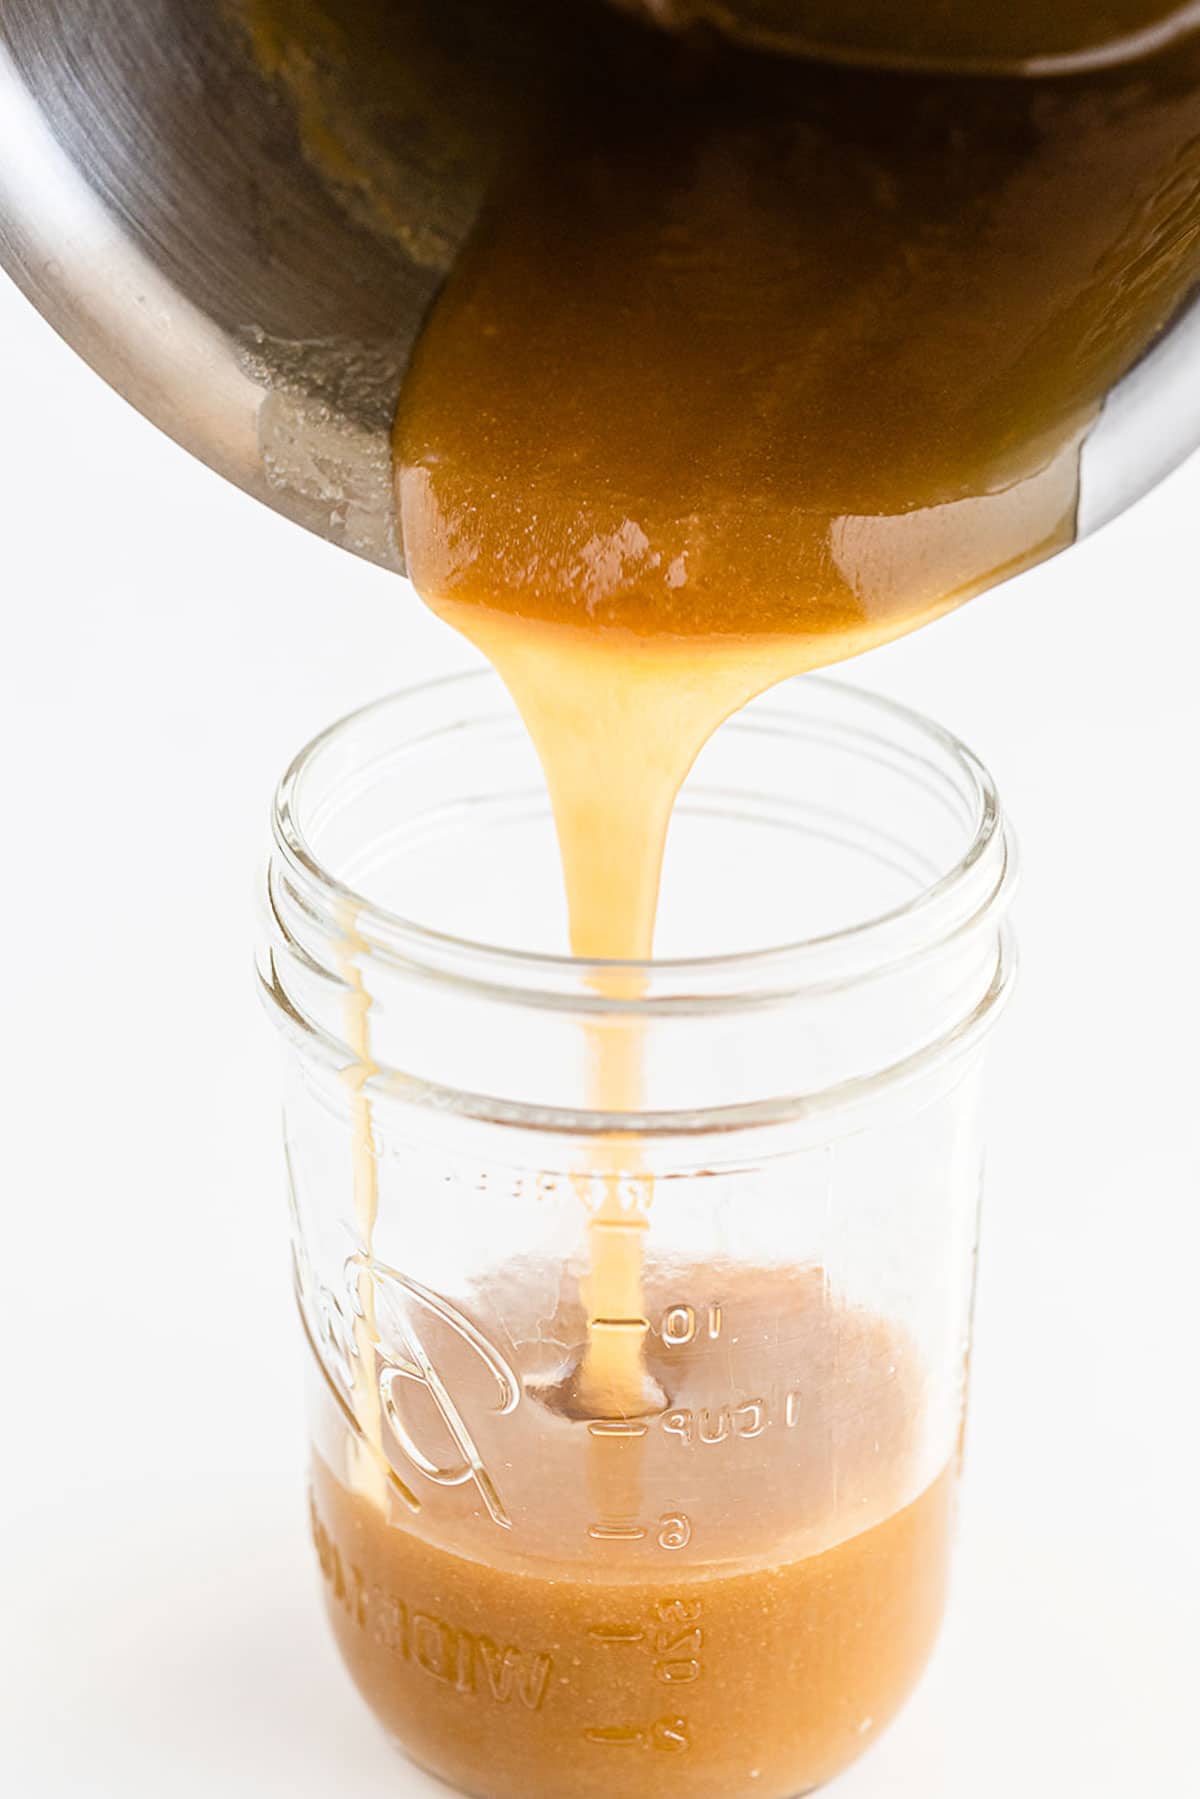 butterscotch sauce being poured into a small glass jar